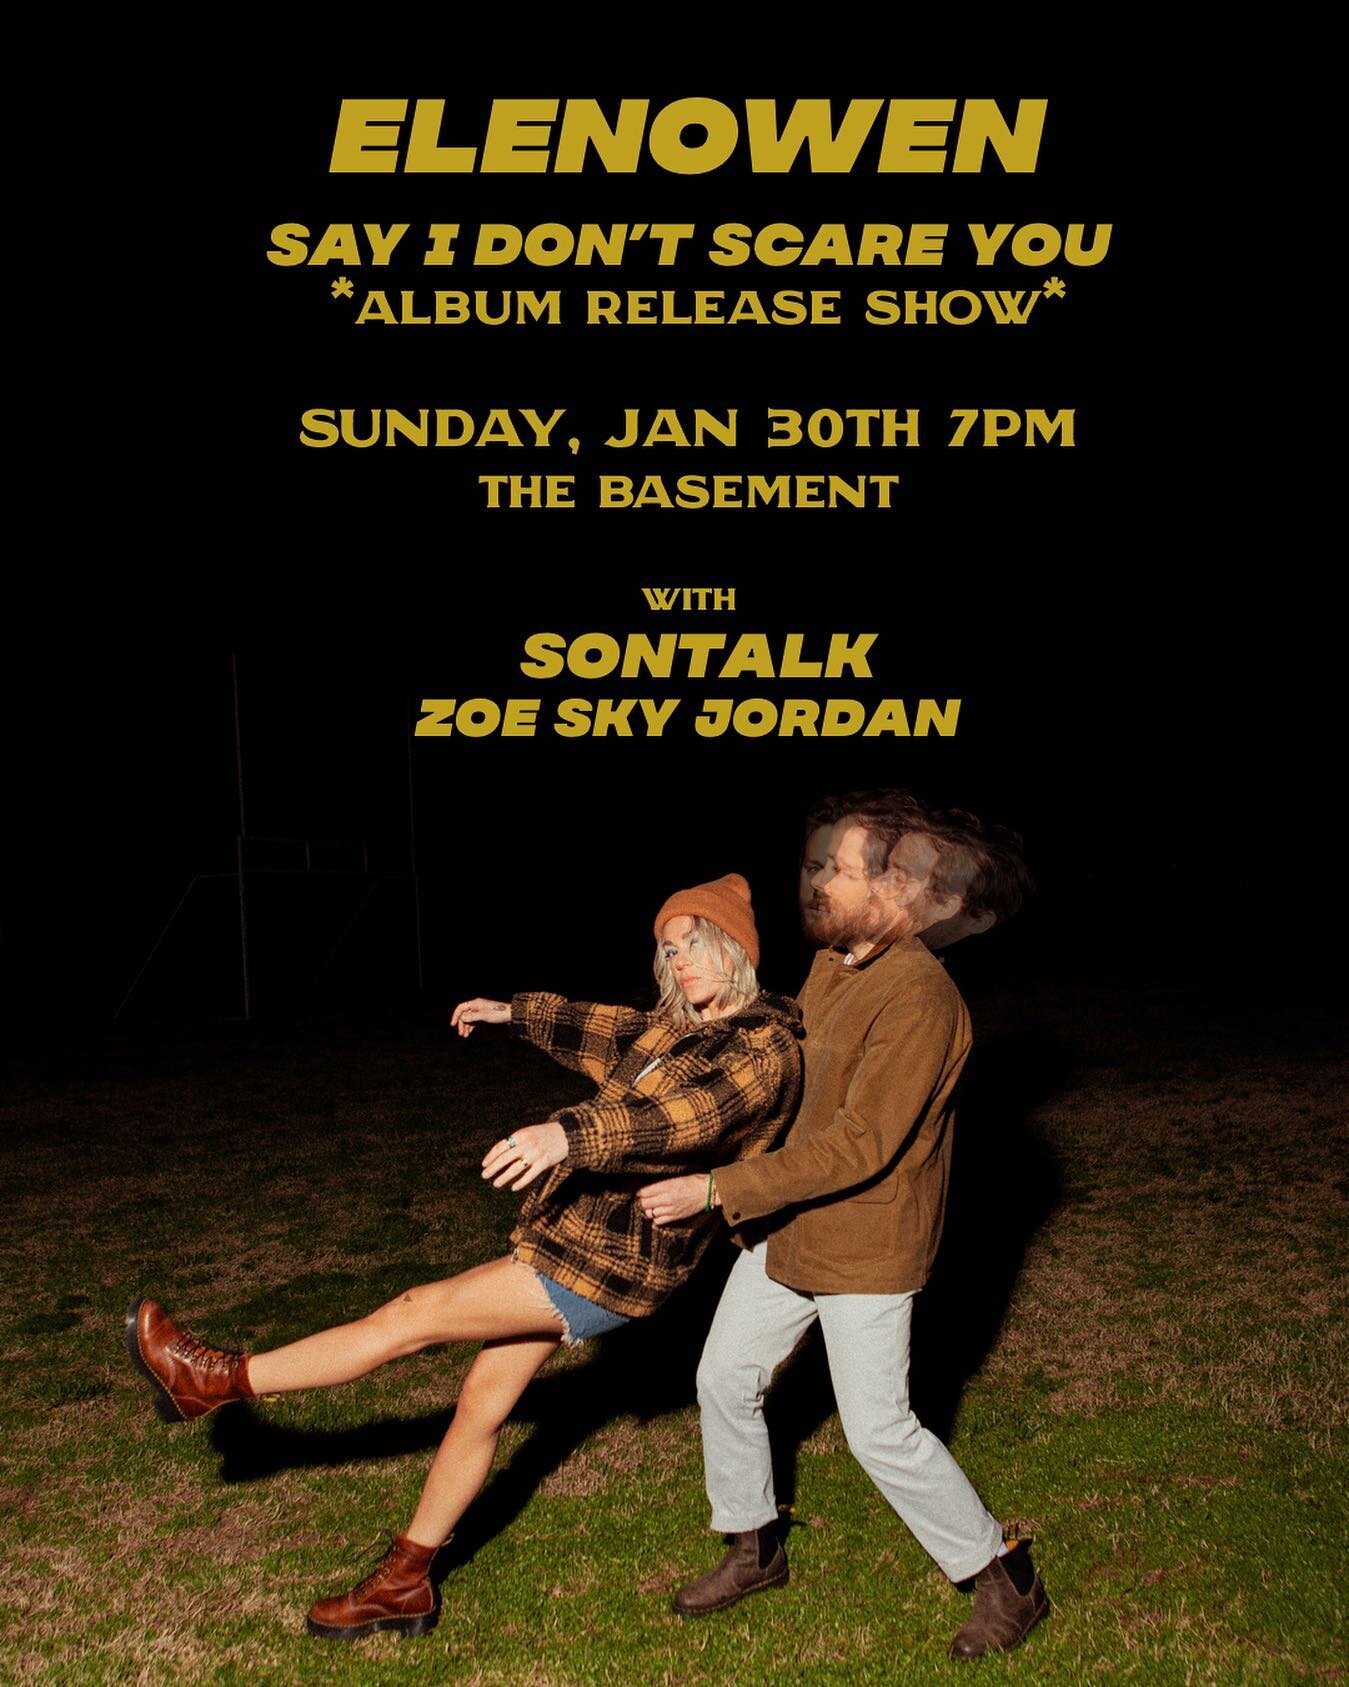 so excited to say we&rsquo;re finally playing a proper release show for &lsquo;say i don&rsquo;t scare you!&rsquo; @thebasementnash on jan 30th. thrilled to have our friends @sontalkmusic and @zoeskyjordan joining us as well!

truly going to be a spe